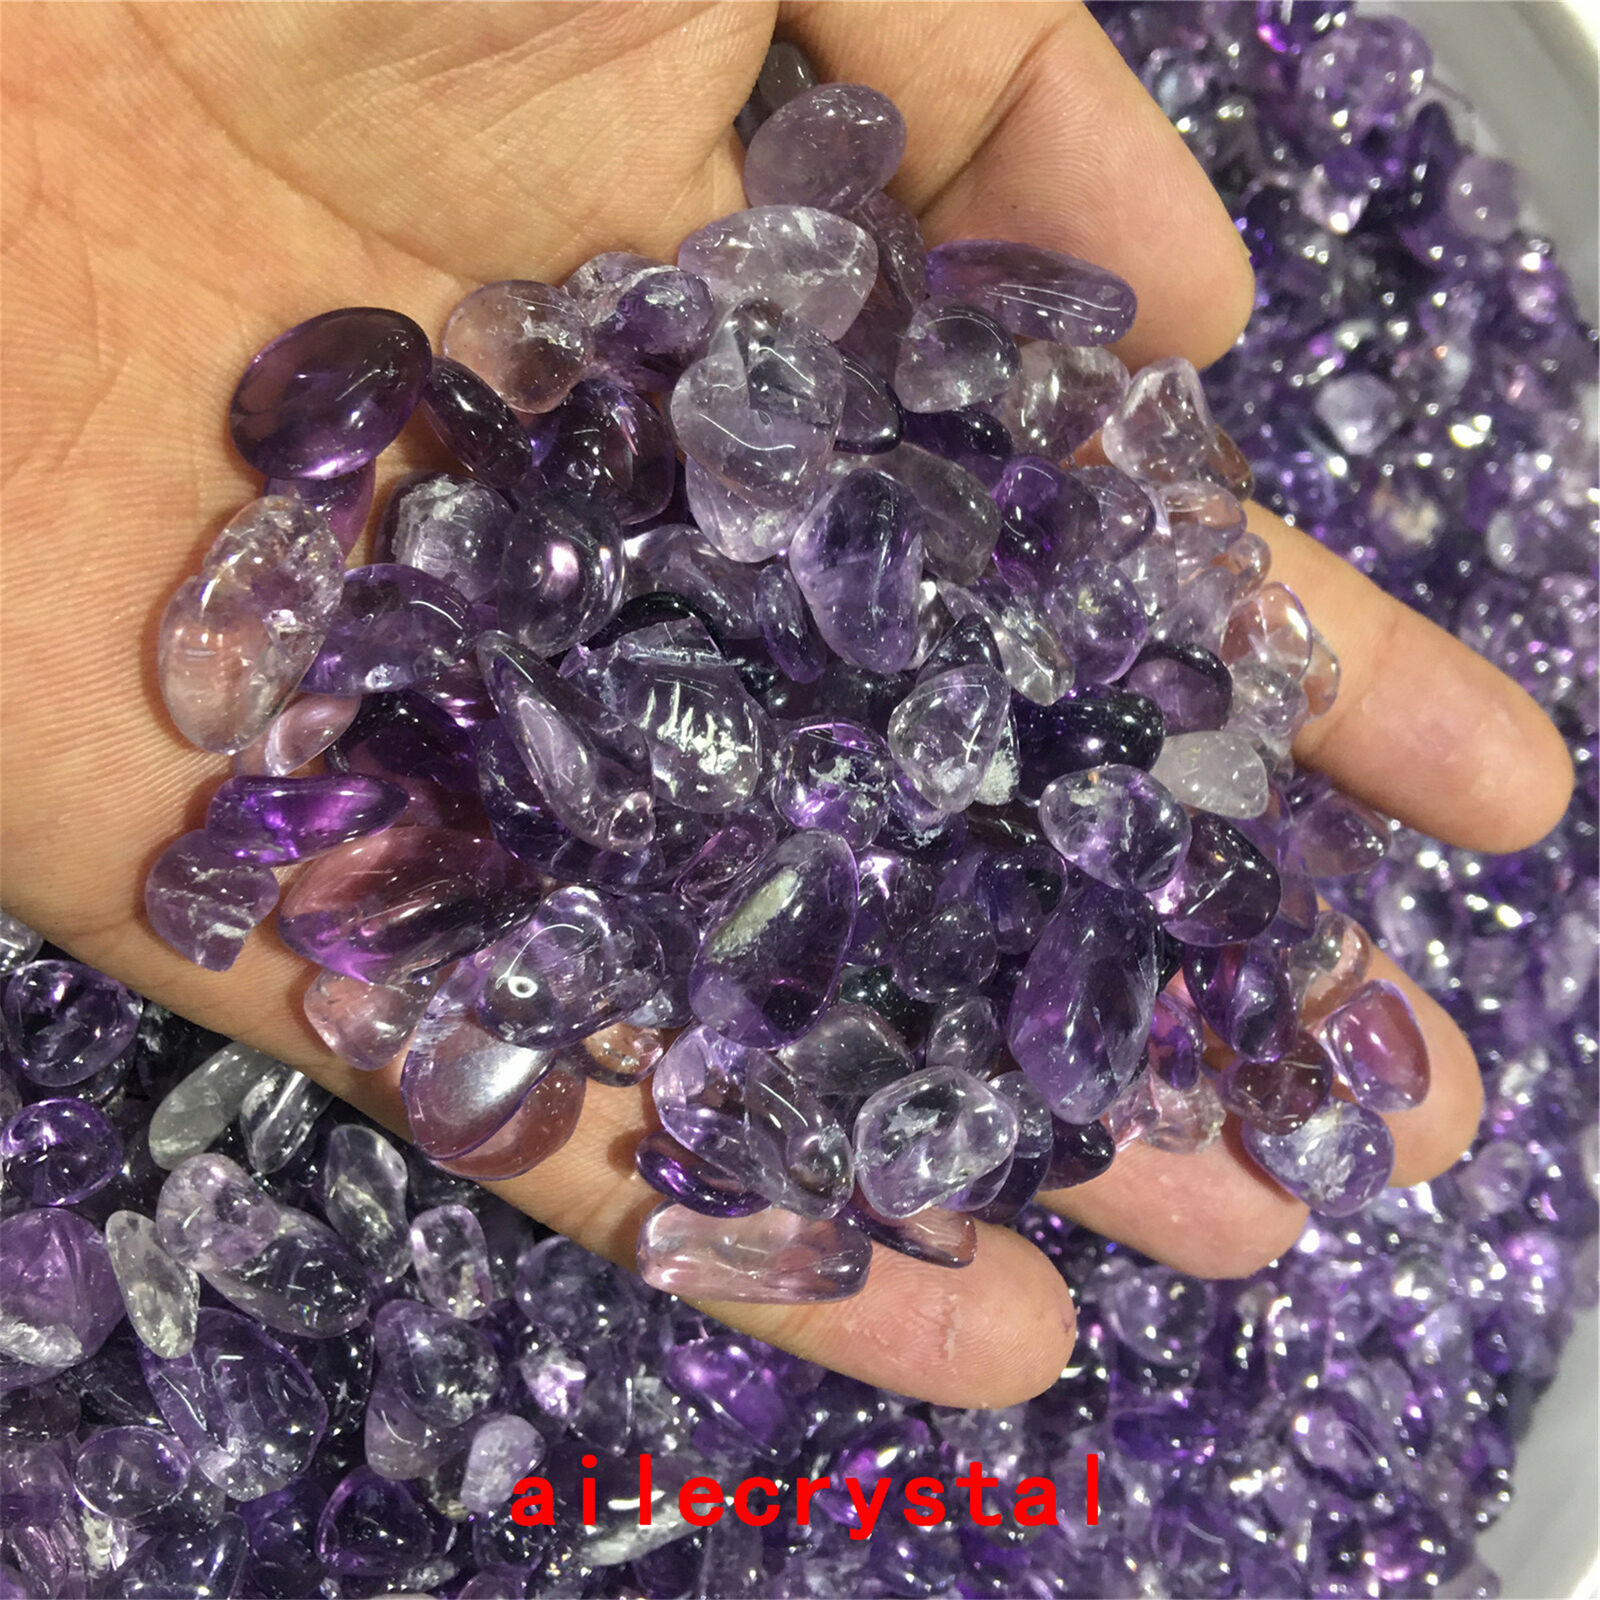 100g TOP Natural Amethyst crystal stone rolling stone Rough Polished 20pc+